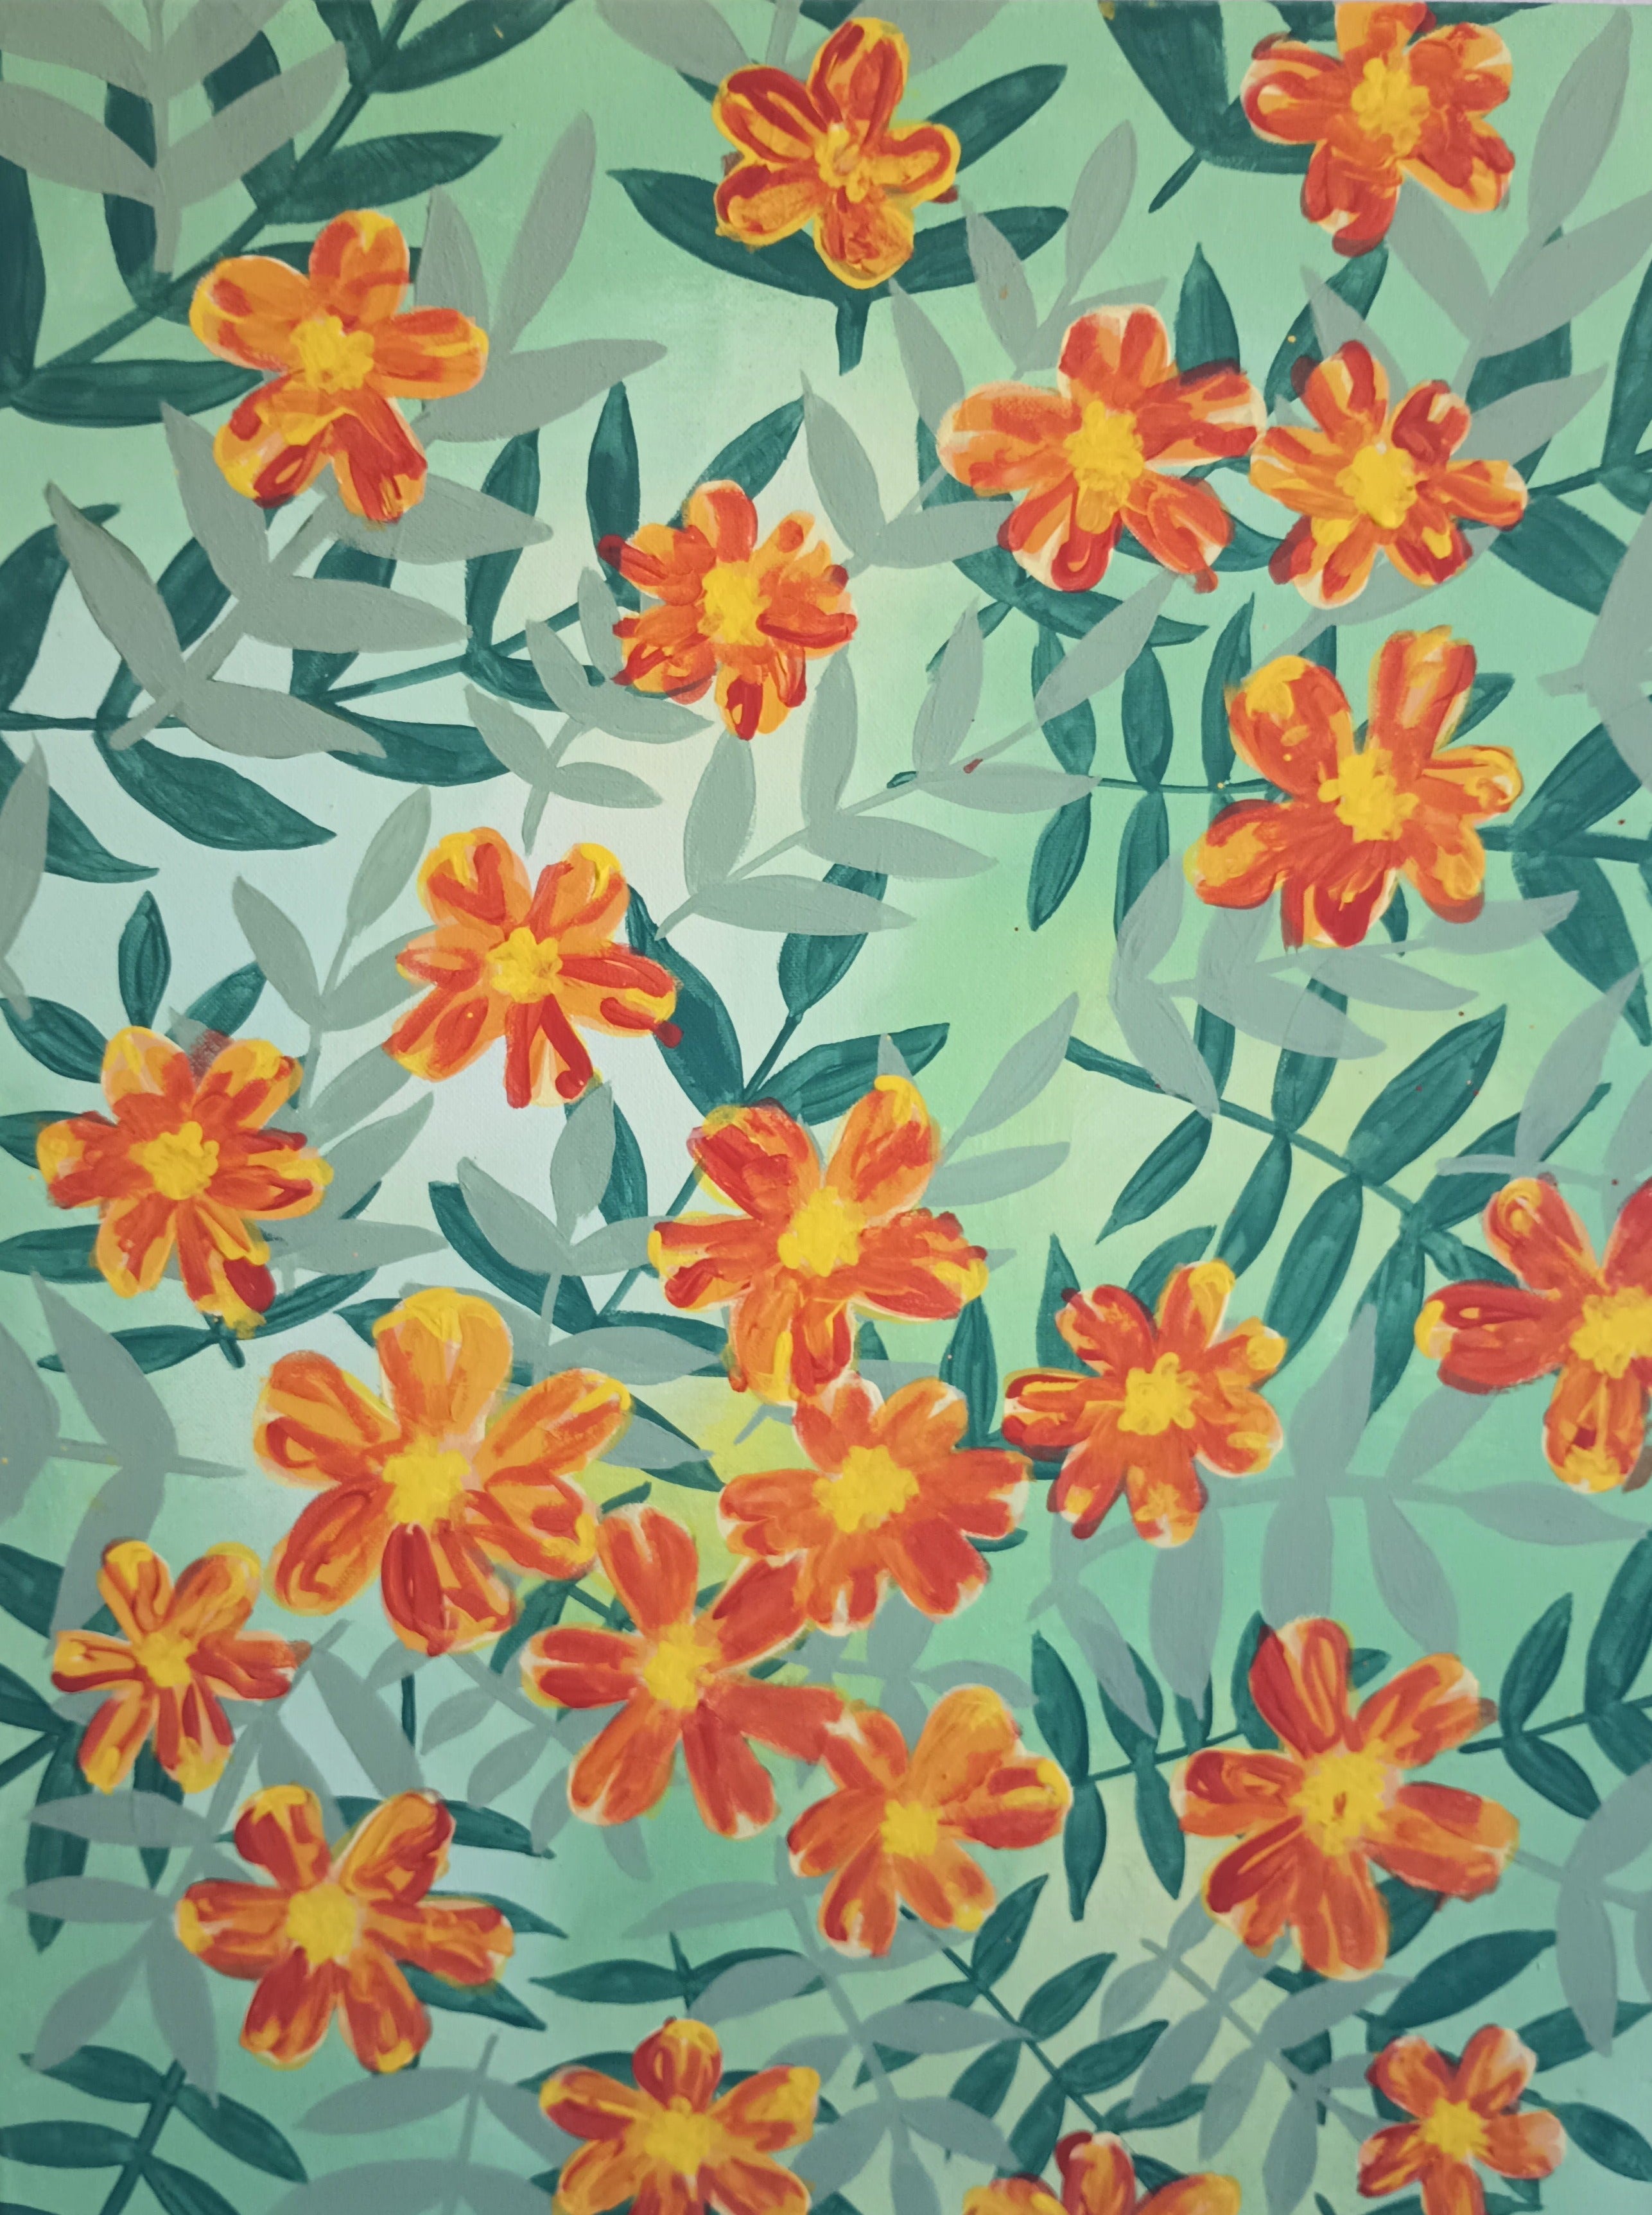 Marigolds by Patricia Gao